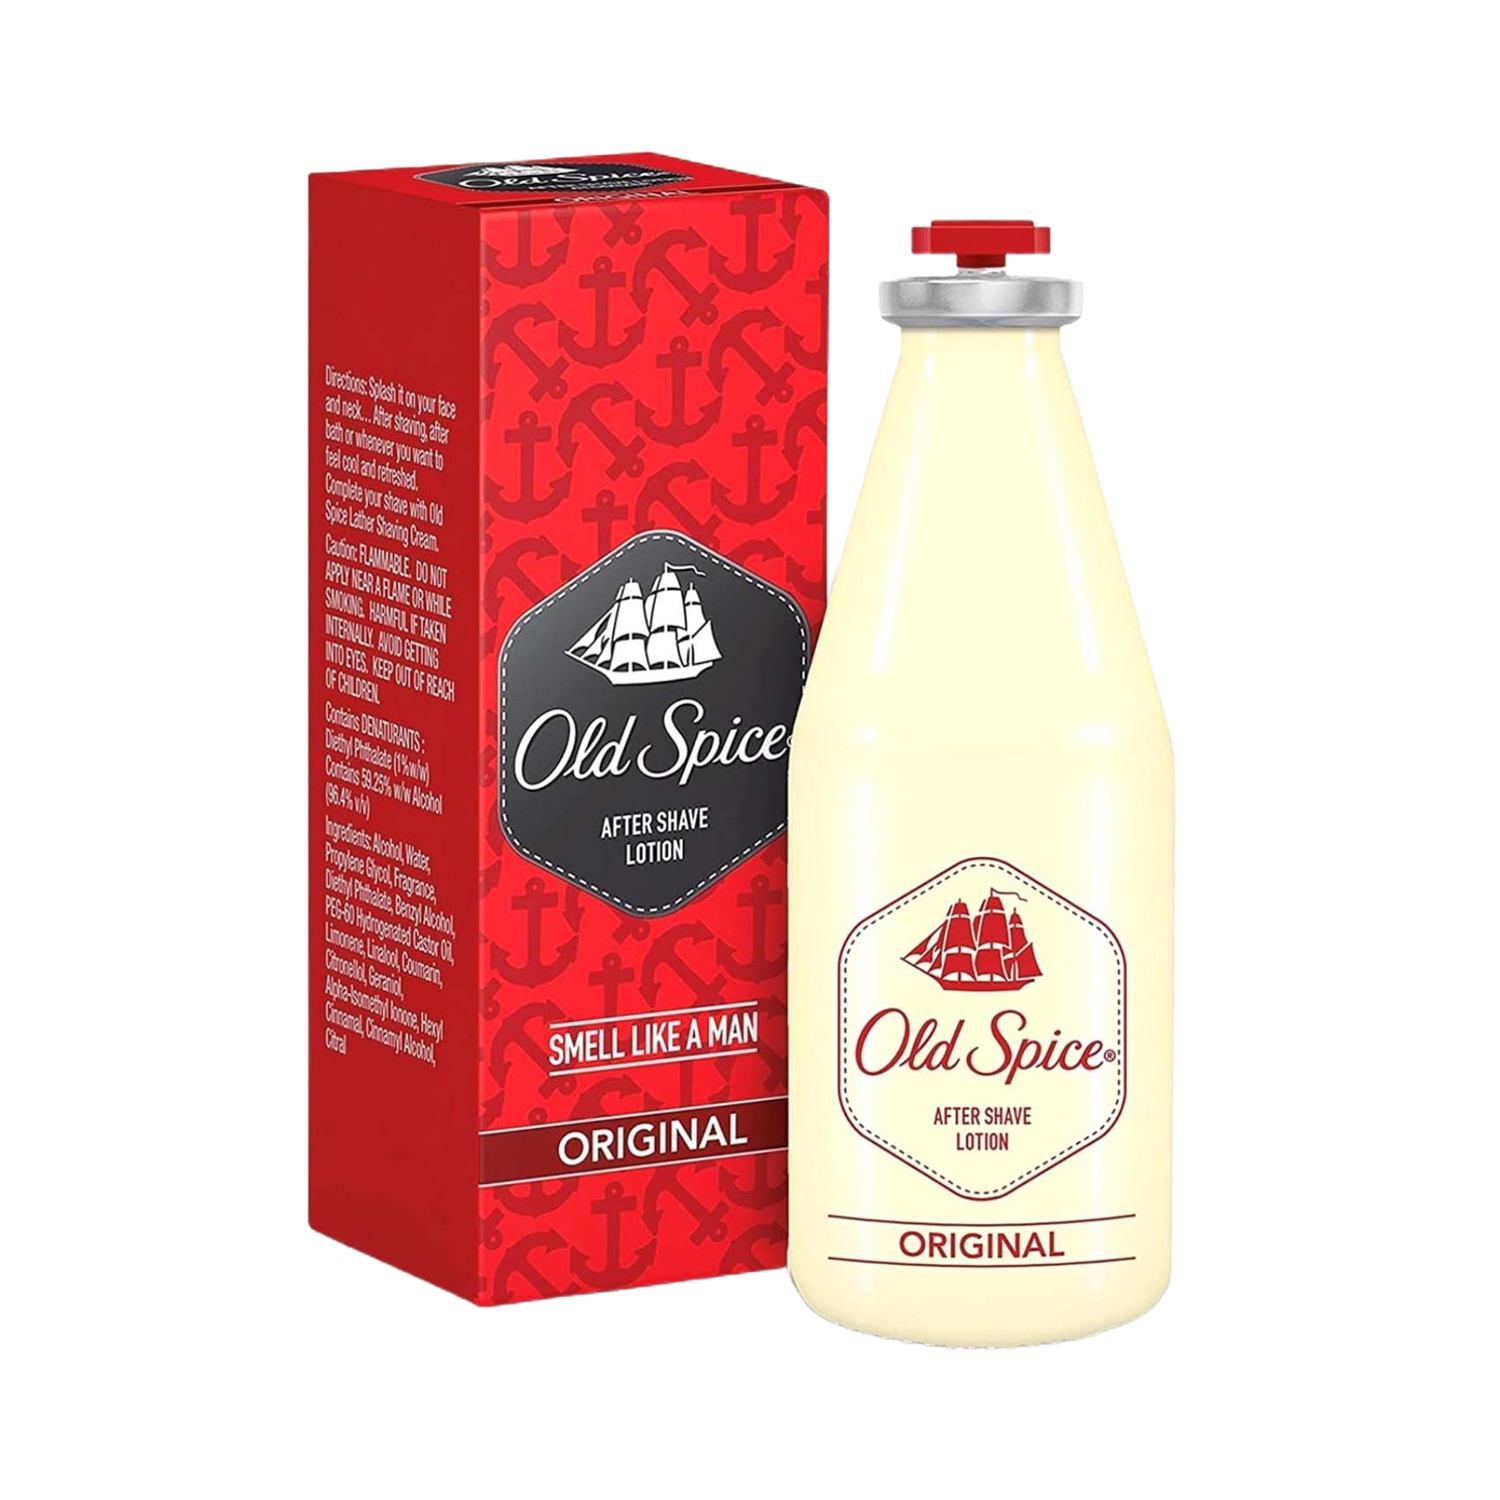 Old Spice | Old Spice Original After Shave Lotion (100ml)